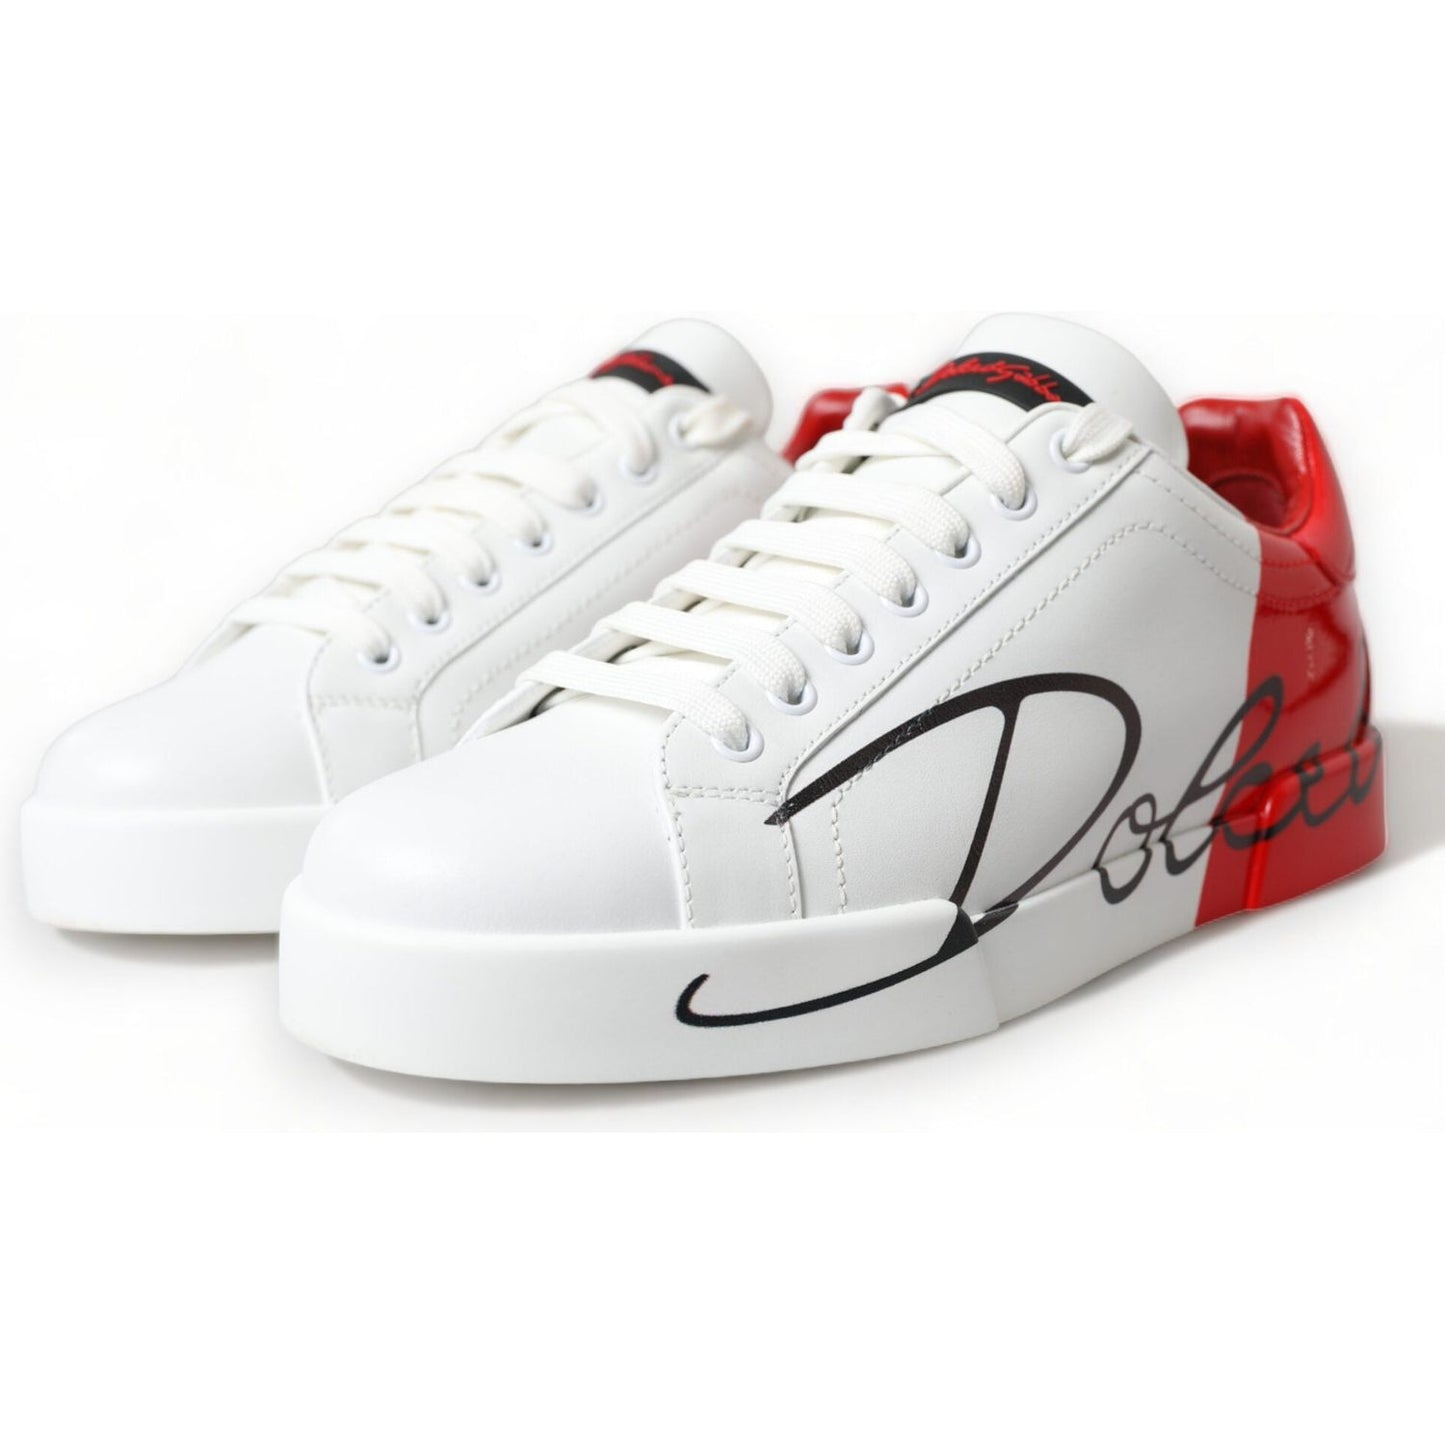 Dolce & Gabbana Chic Red and White Leather Sneakers white-red-leather-logo-low-top-sneakers-men-shoes